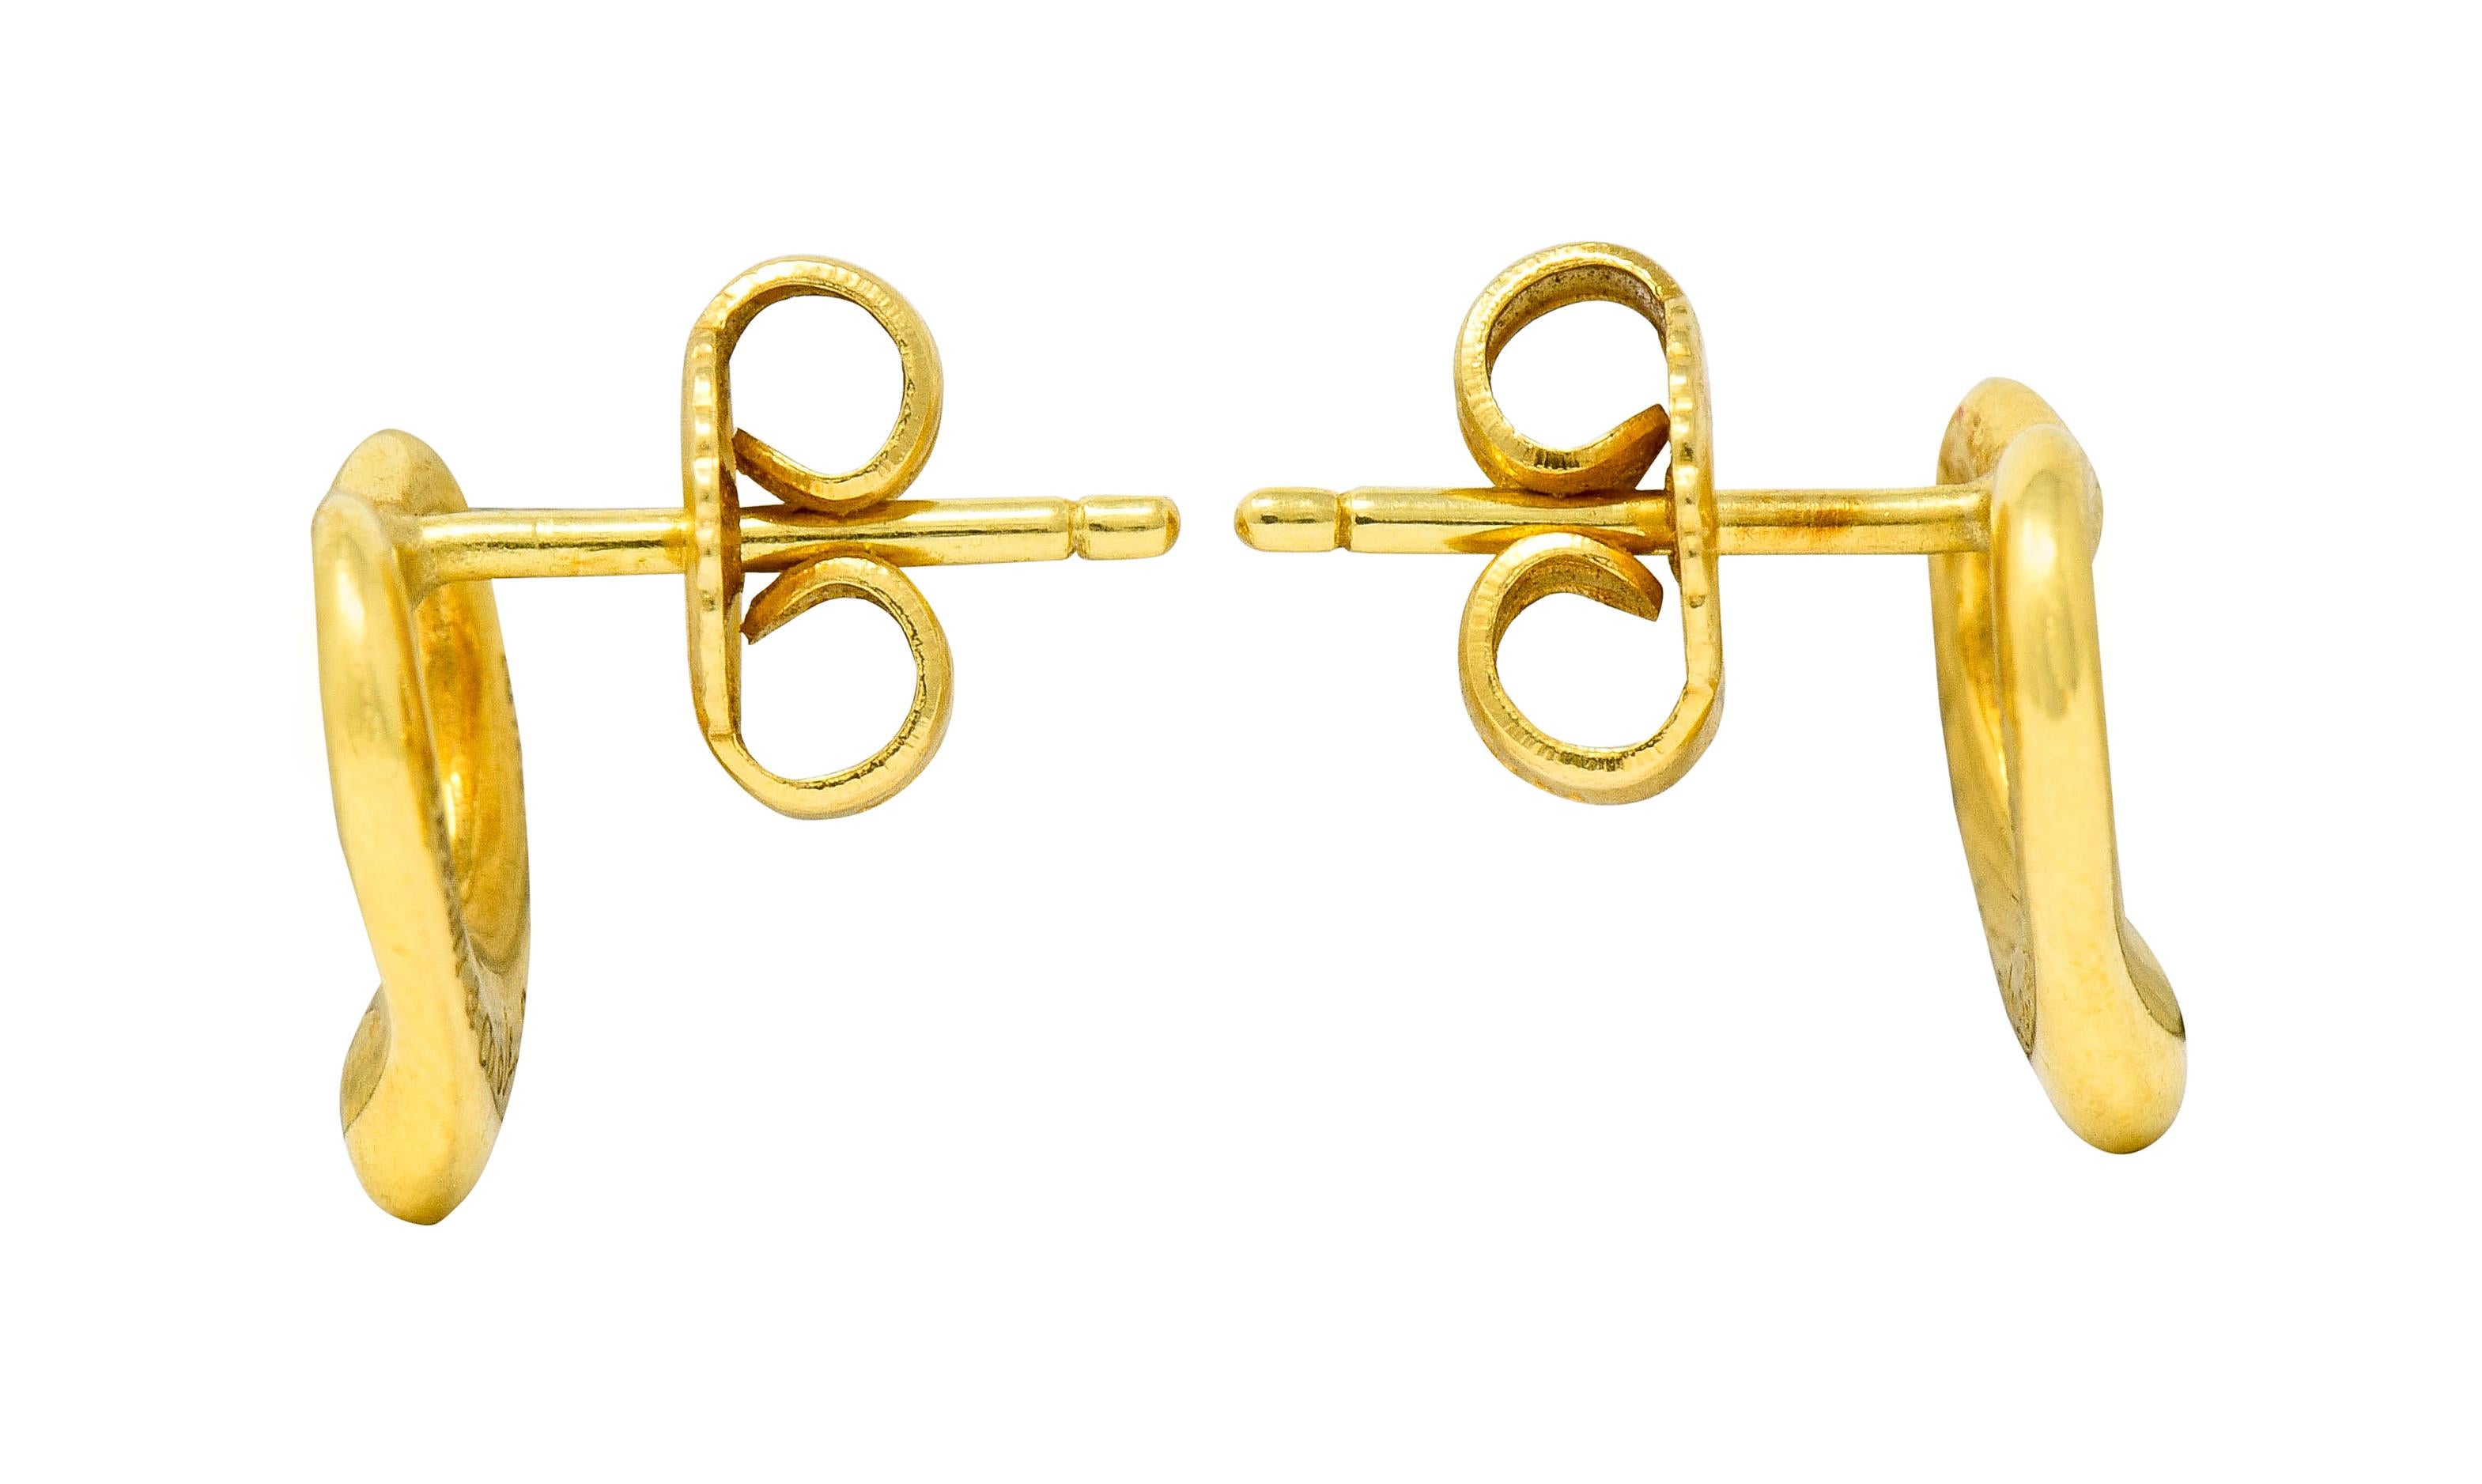 Stud style earrings designed as a polished gold open heart motif

Completed by posts and friction backs

Both fully signed Tiffany & Co. Elsa Peretti Spain

Both stamped 750 for 18 karat gold

Measures: 10.4 x 10.7 mm

Total weight: 2.8